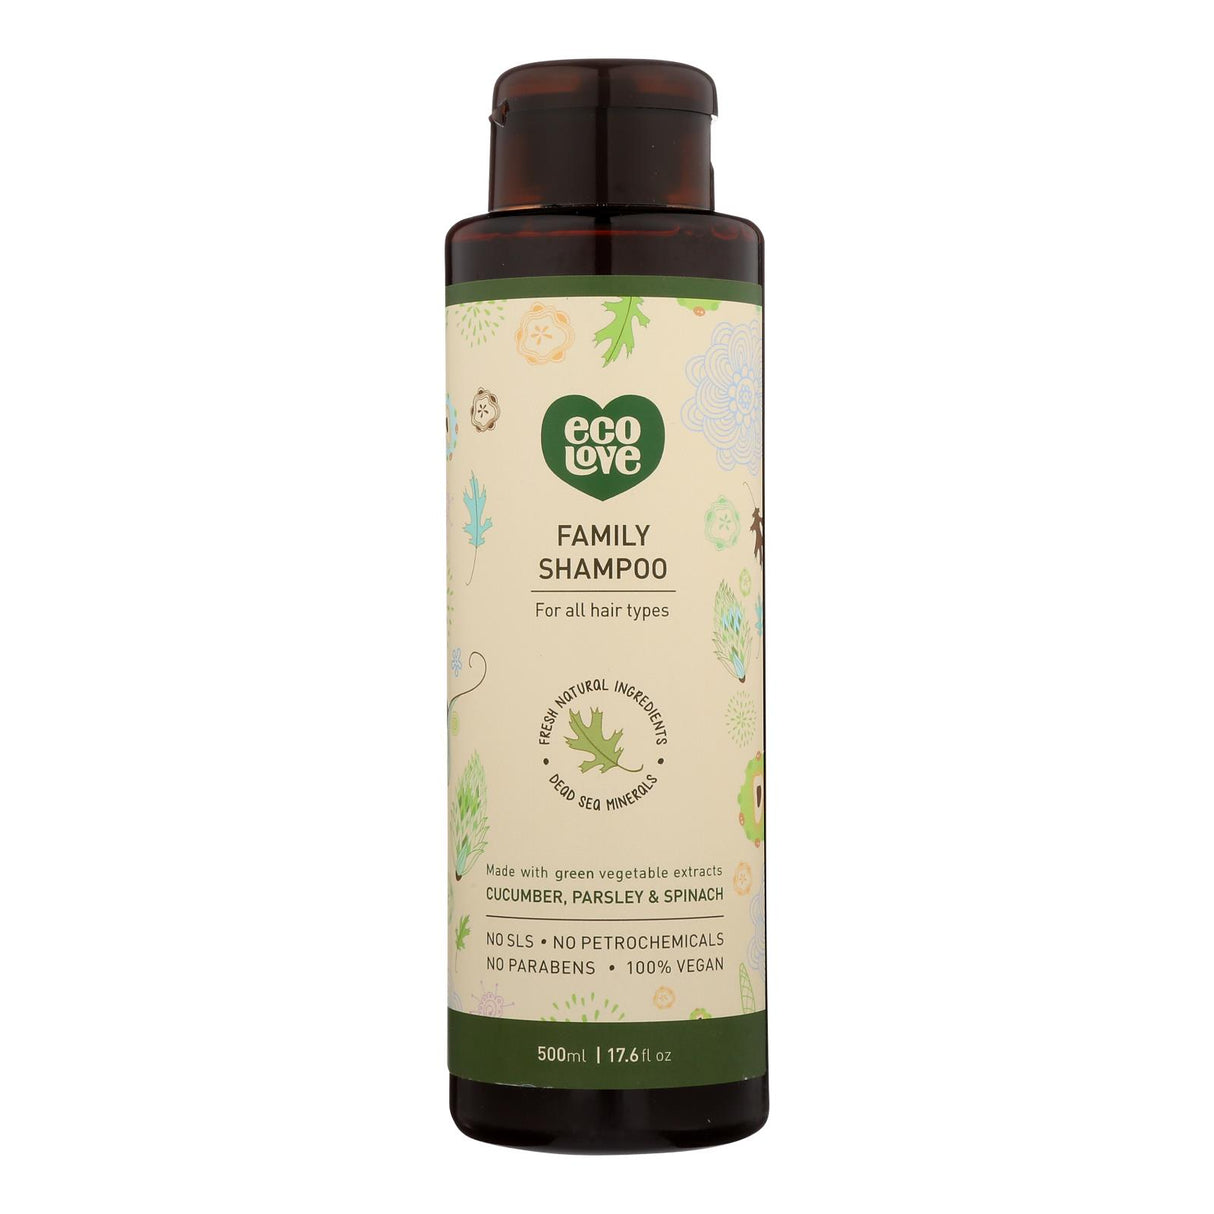 Ecolove Shampoo - Green Vegetables Family Shampoo For All Hair Types - Case Of 1 - 17.6 Fl Oz.